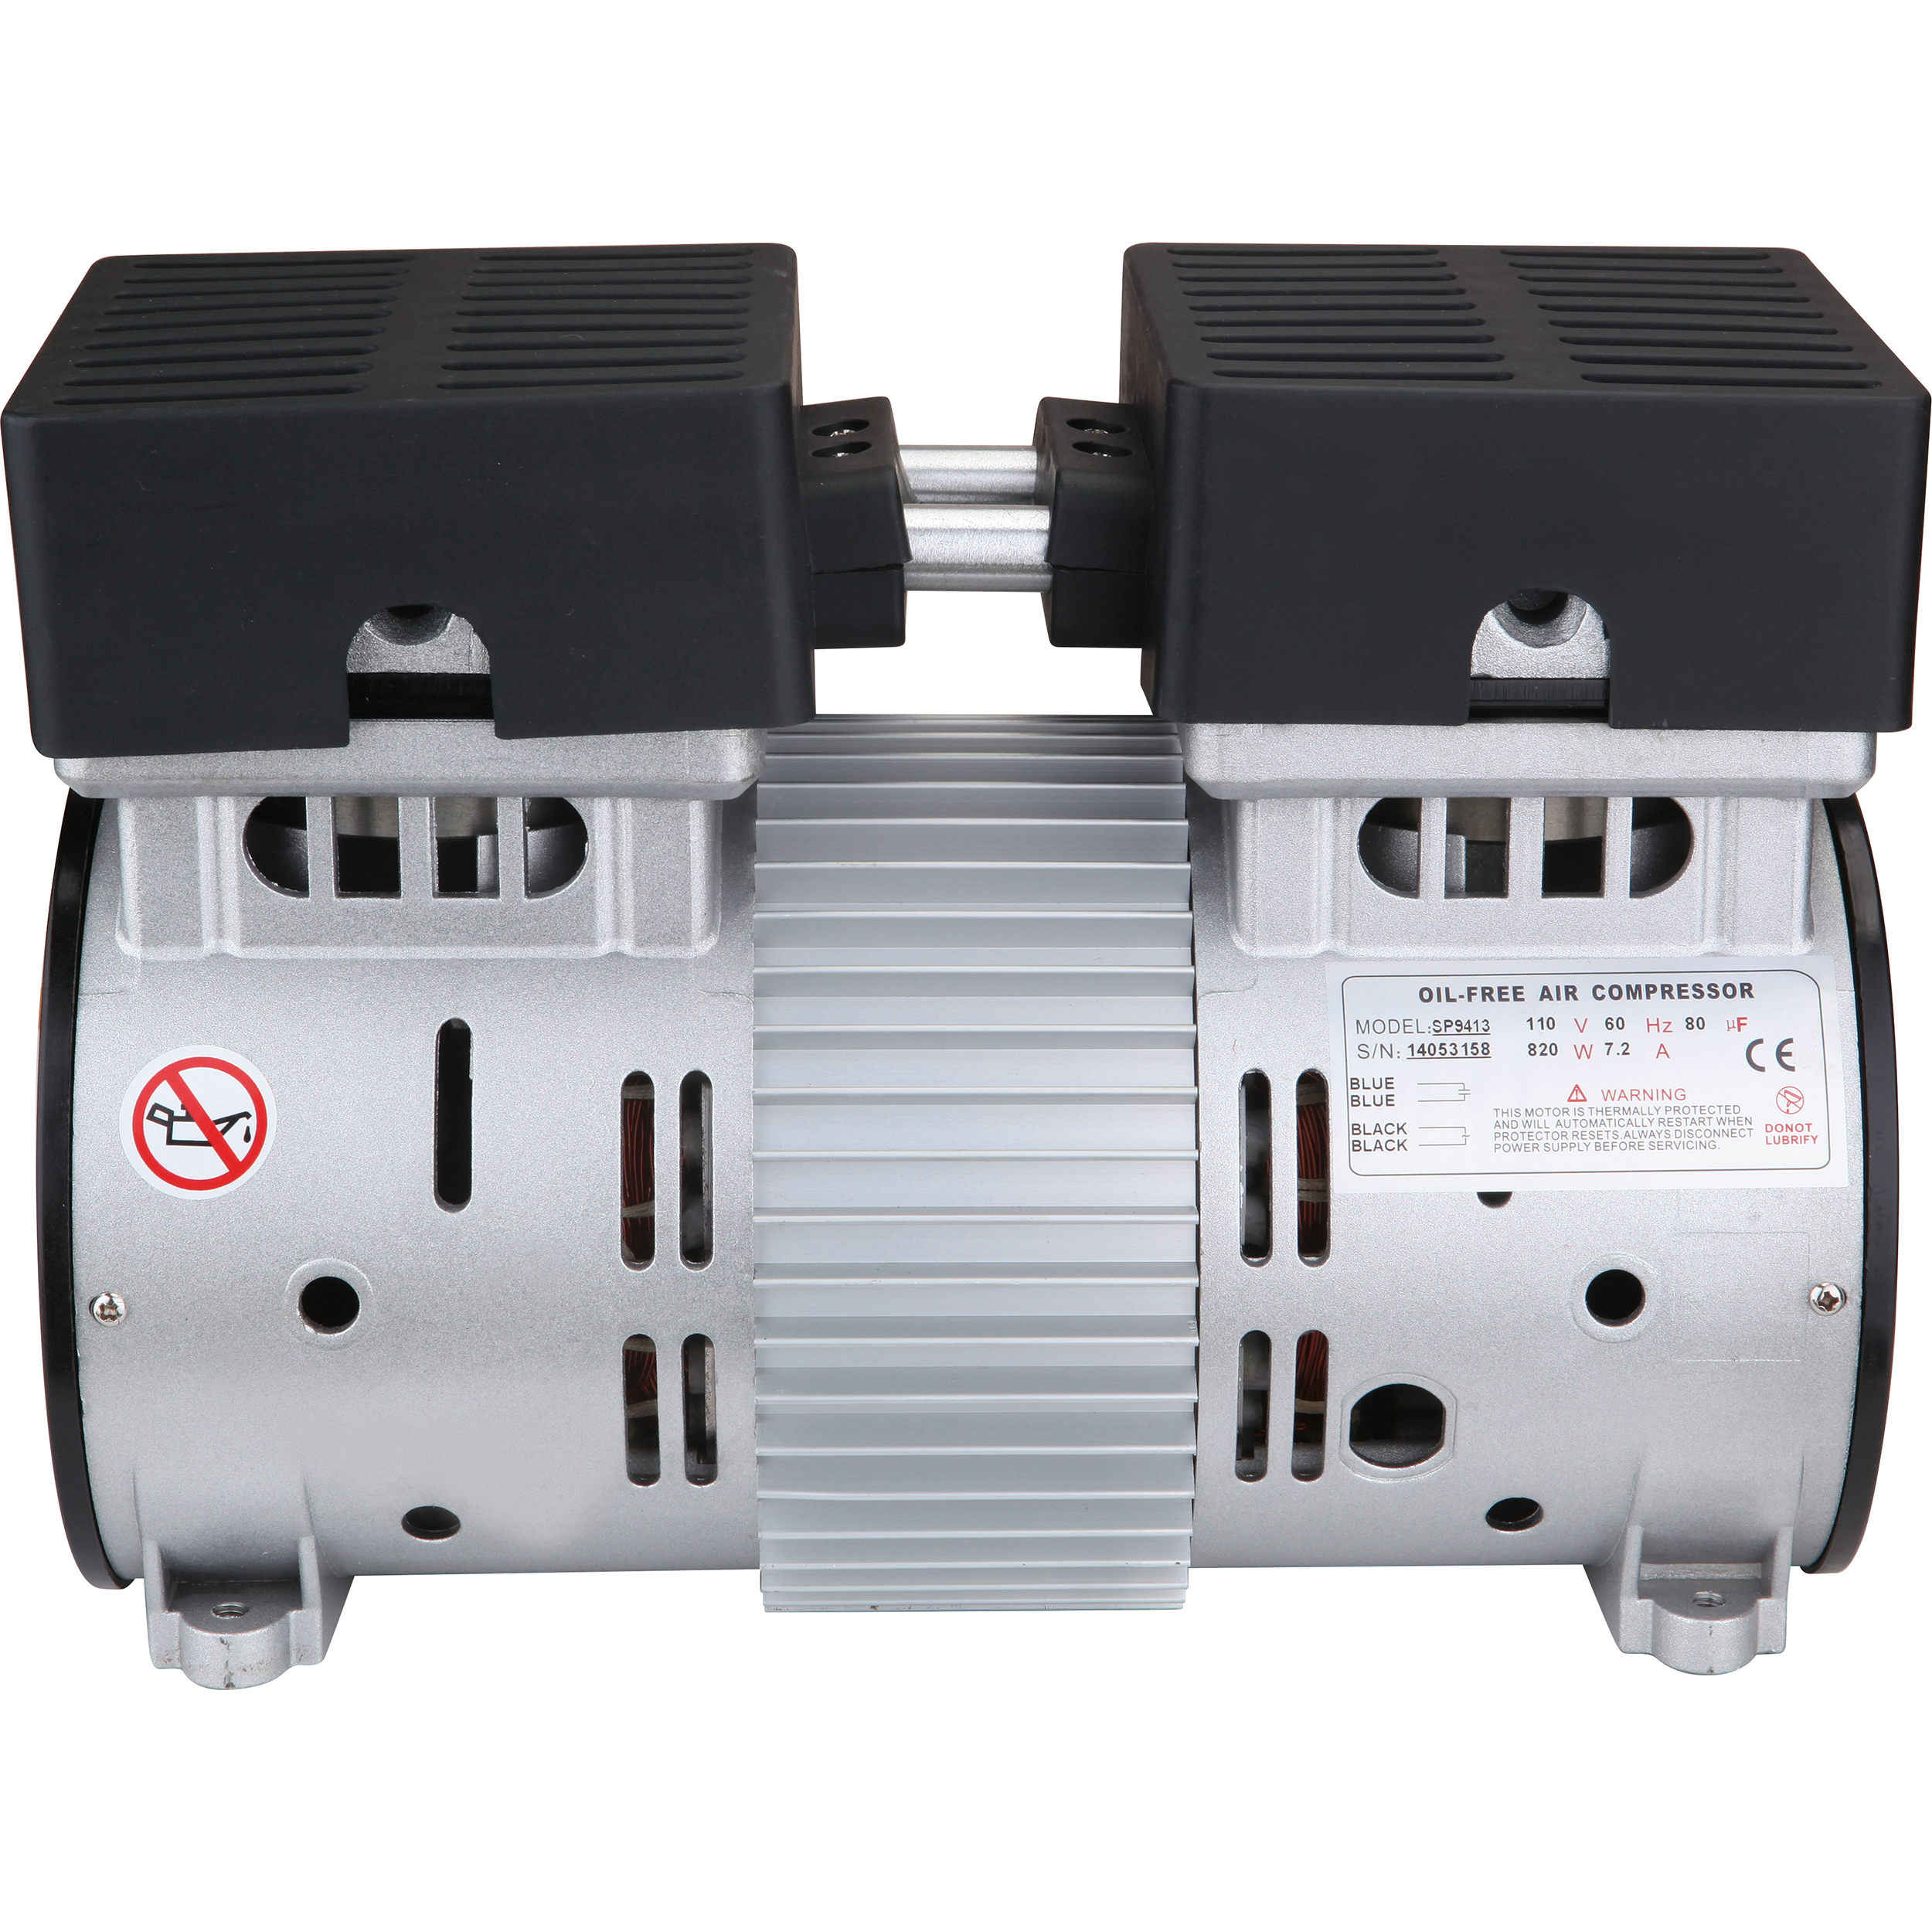 Sp-9413 1 Hp Ultra Quiet And Oil-free Air Compressor Motor